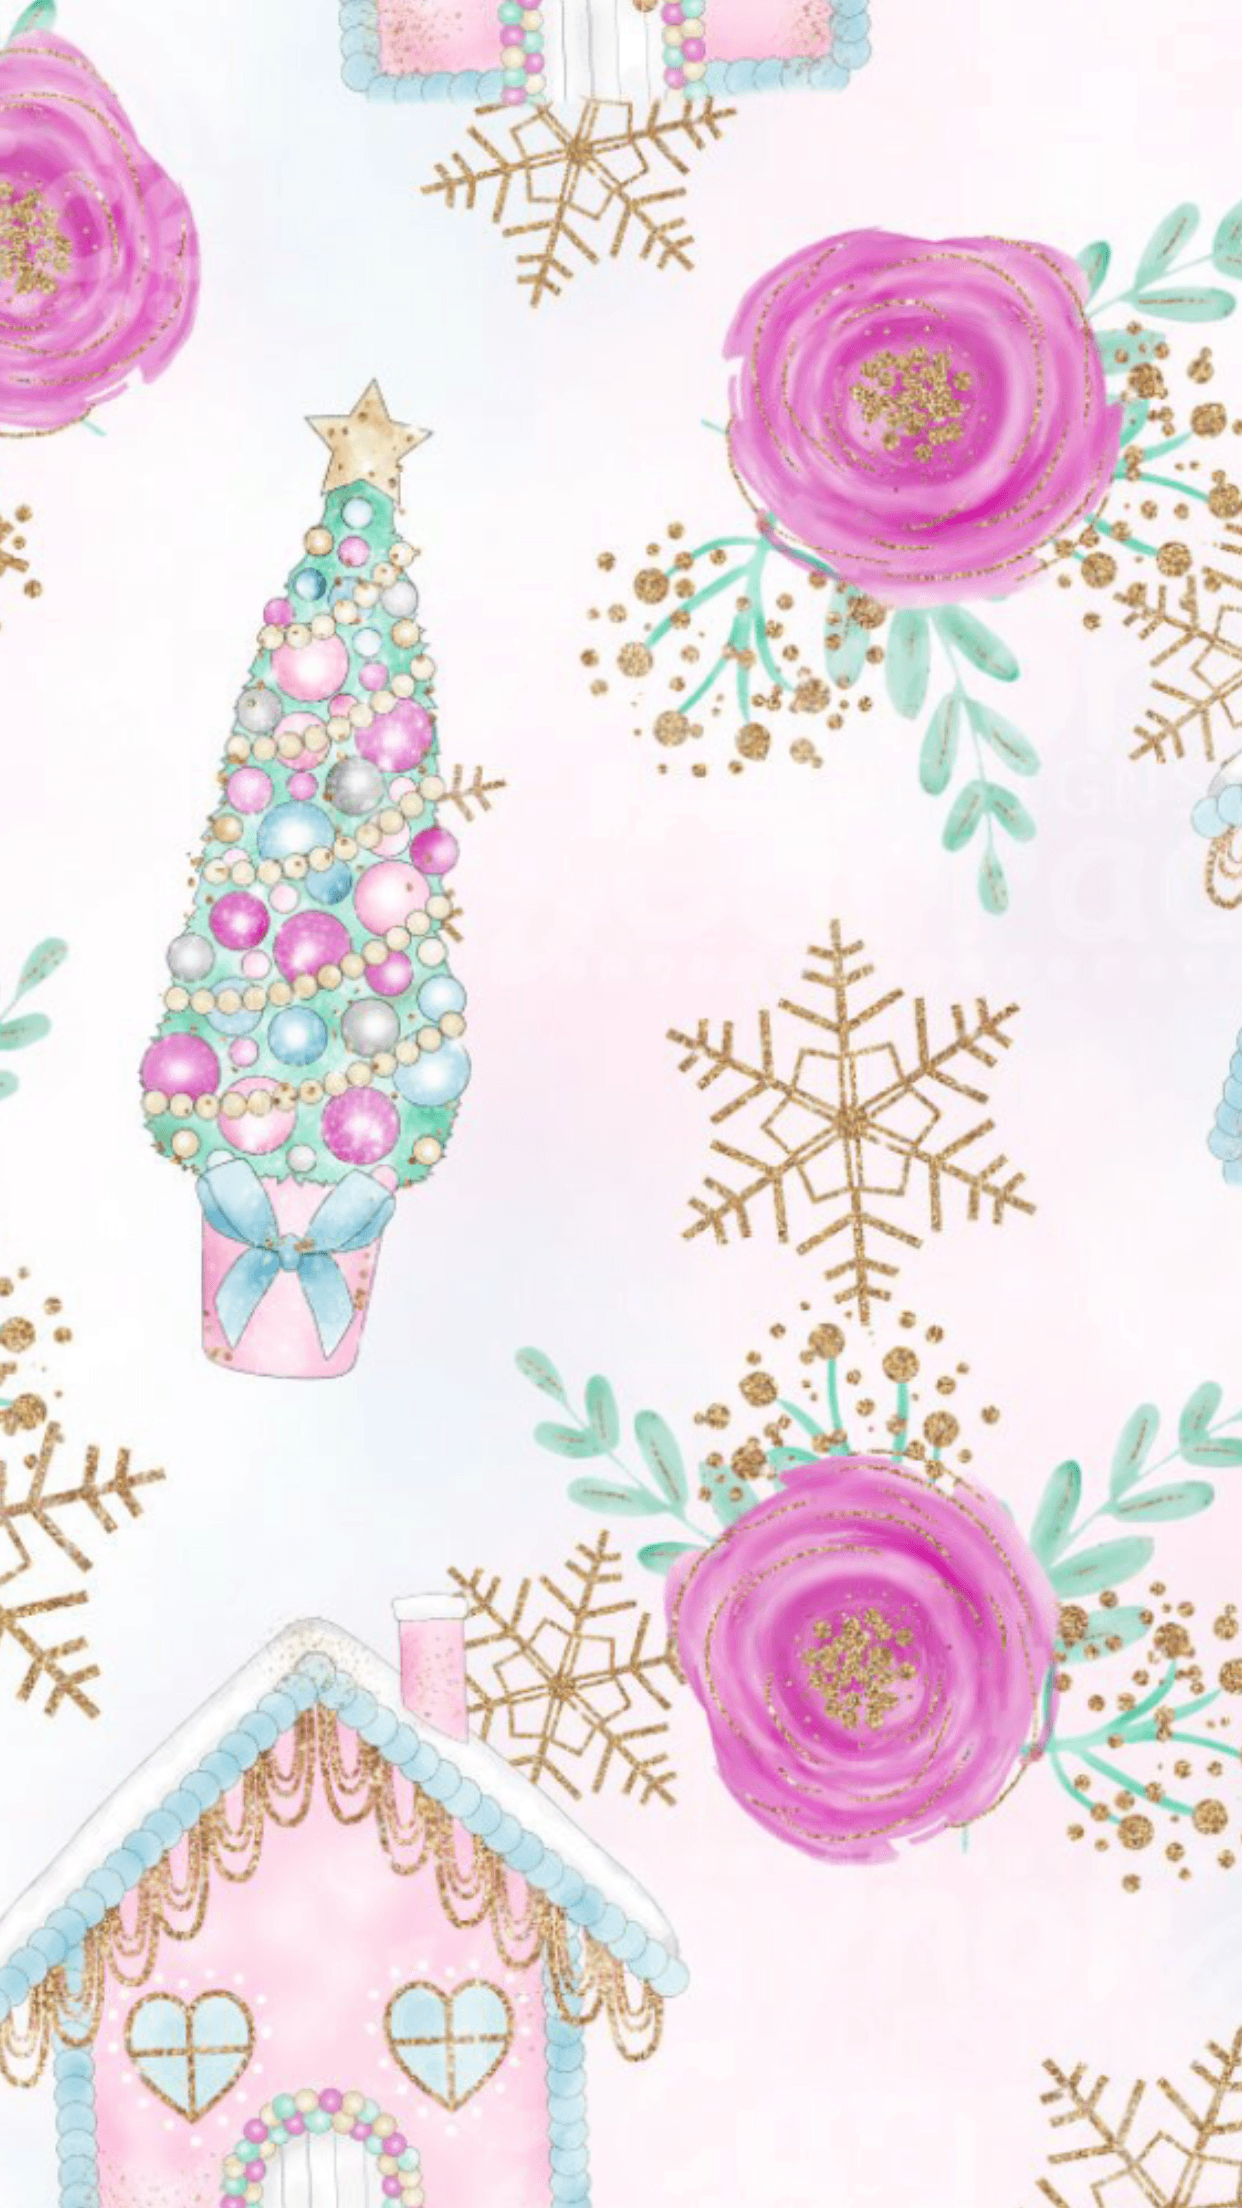 25 Free Christmas Wallpapers for iPhone